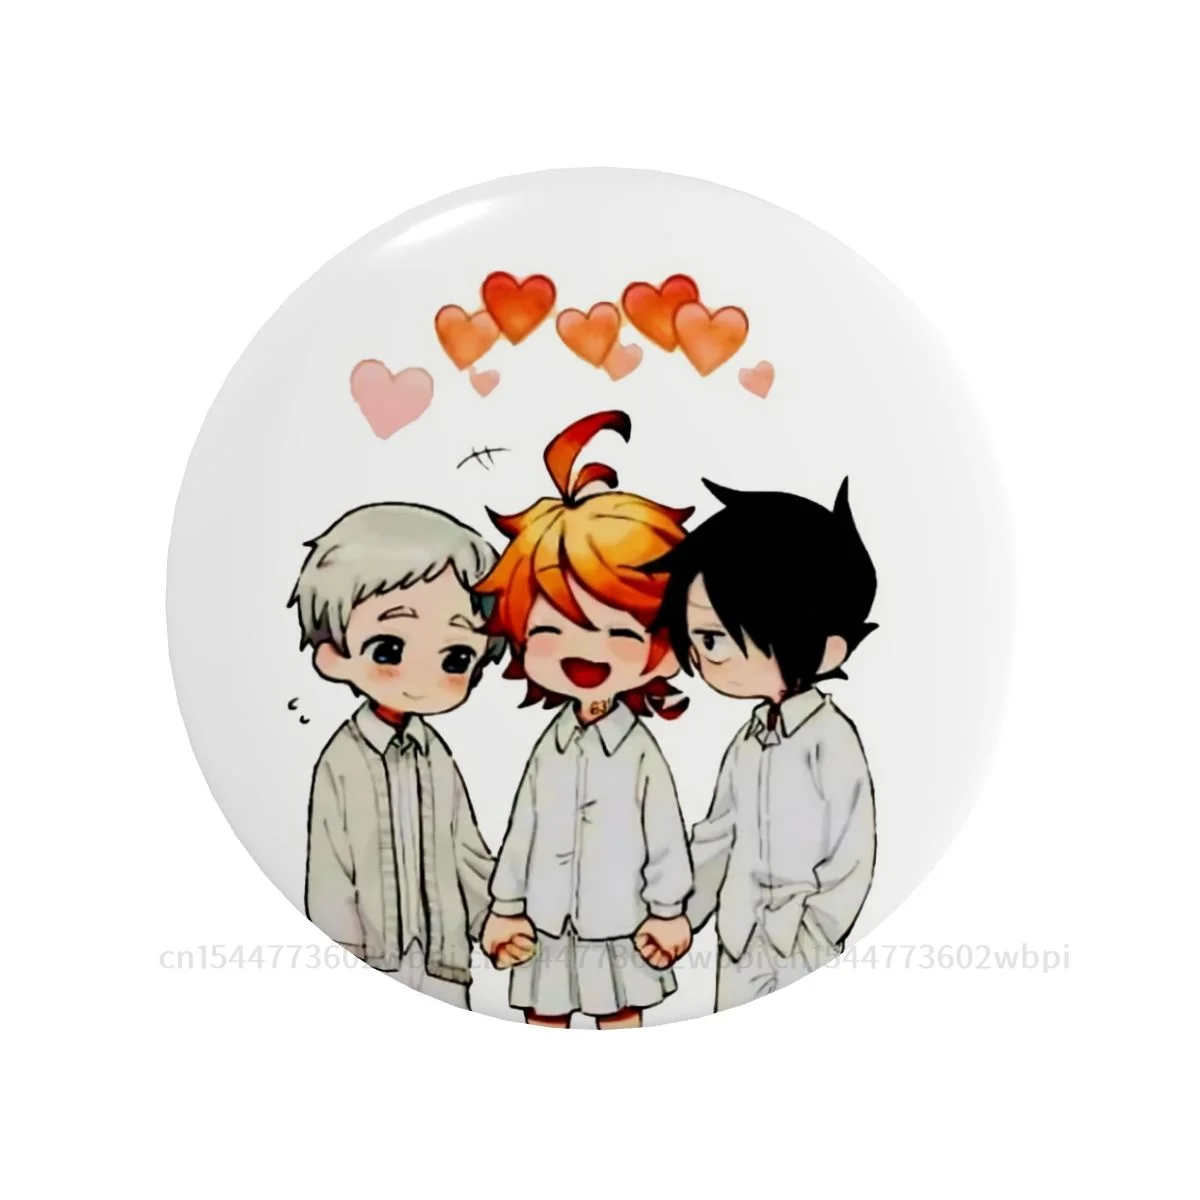 

The Promised Neverland Ray Emma And Norman Badge Metal Brooch Soft Button Pin Lover Creative Gift Collar Decor Customizable